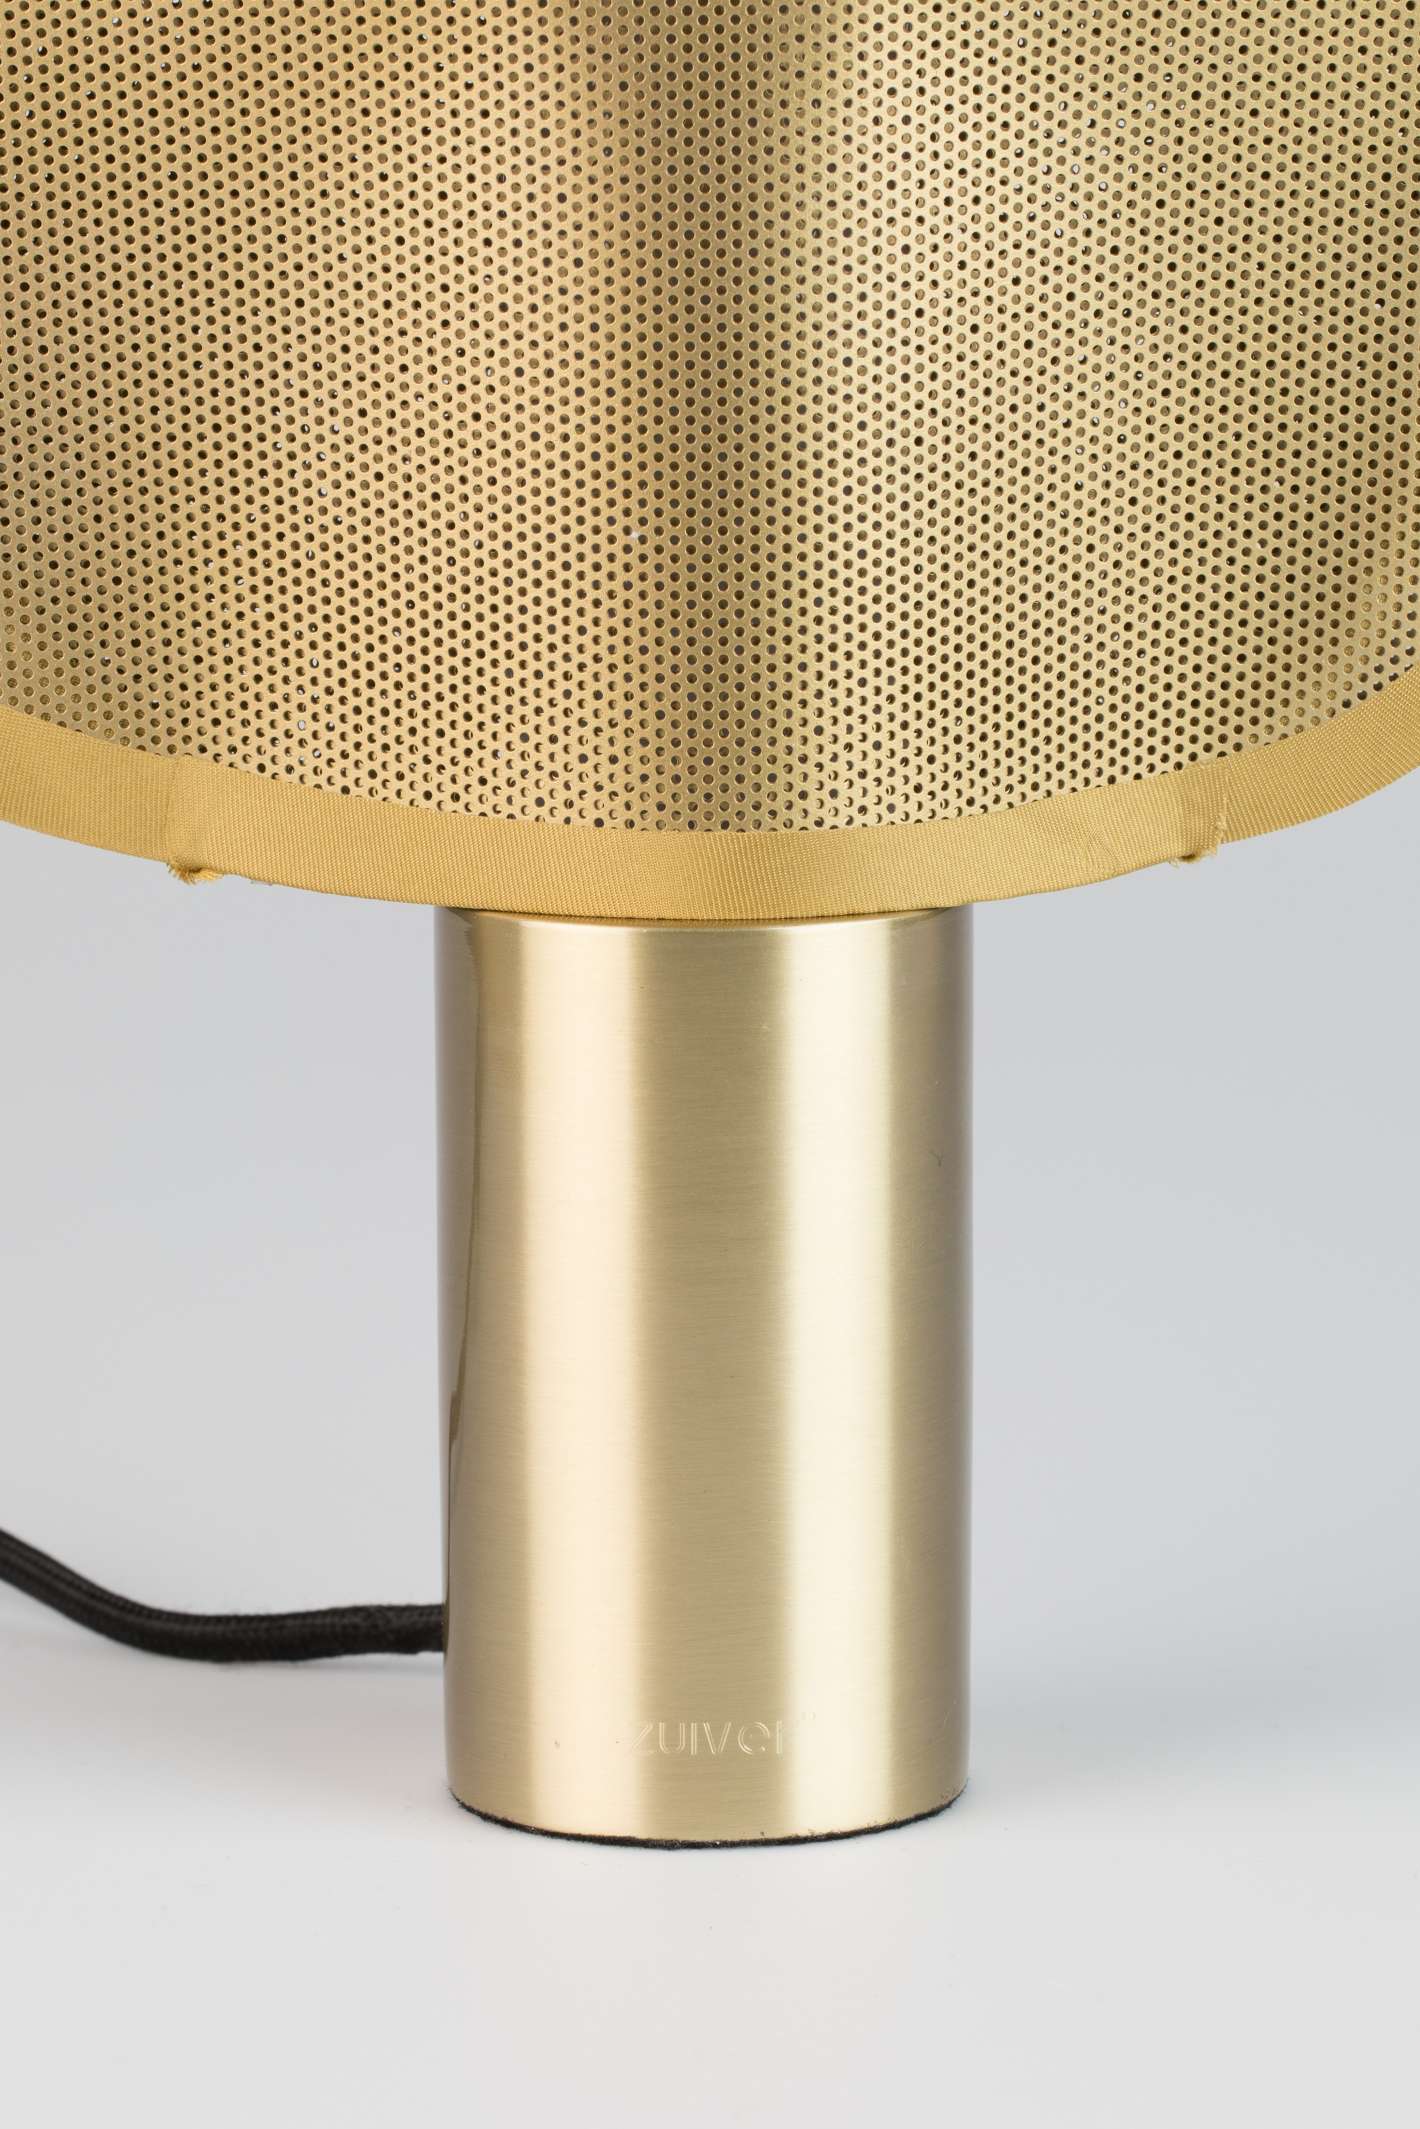 Zuiver | TABLE LAMP MAI S BRASS Default Title